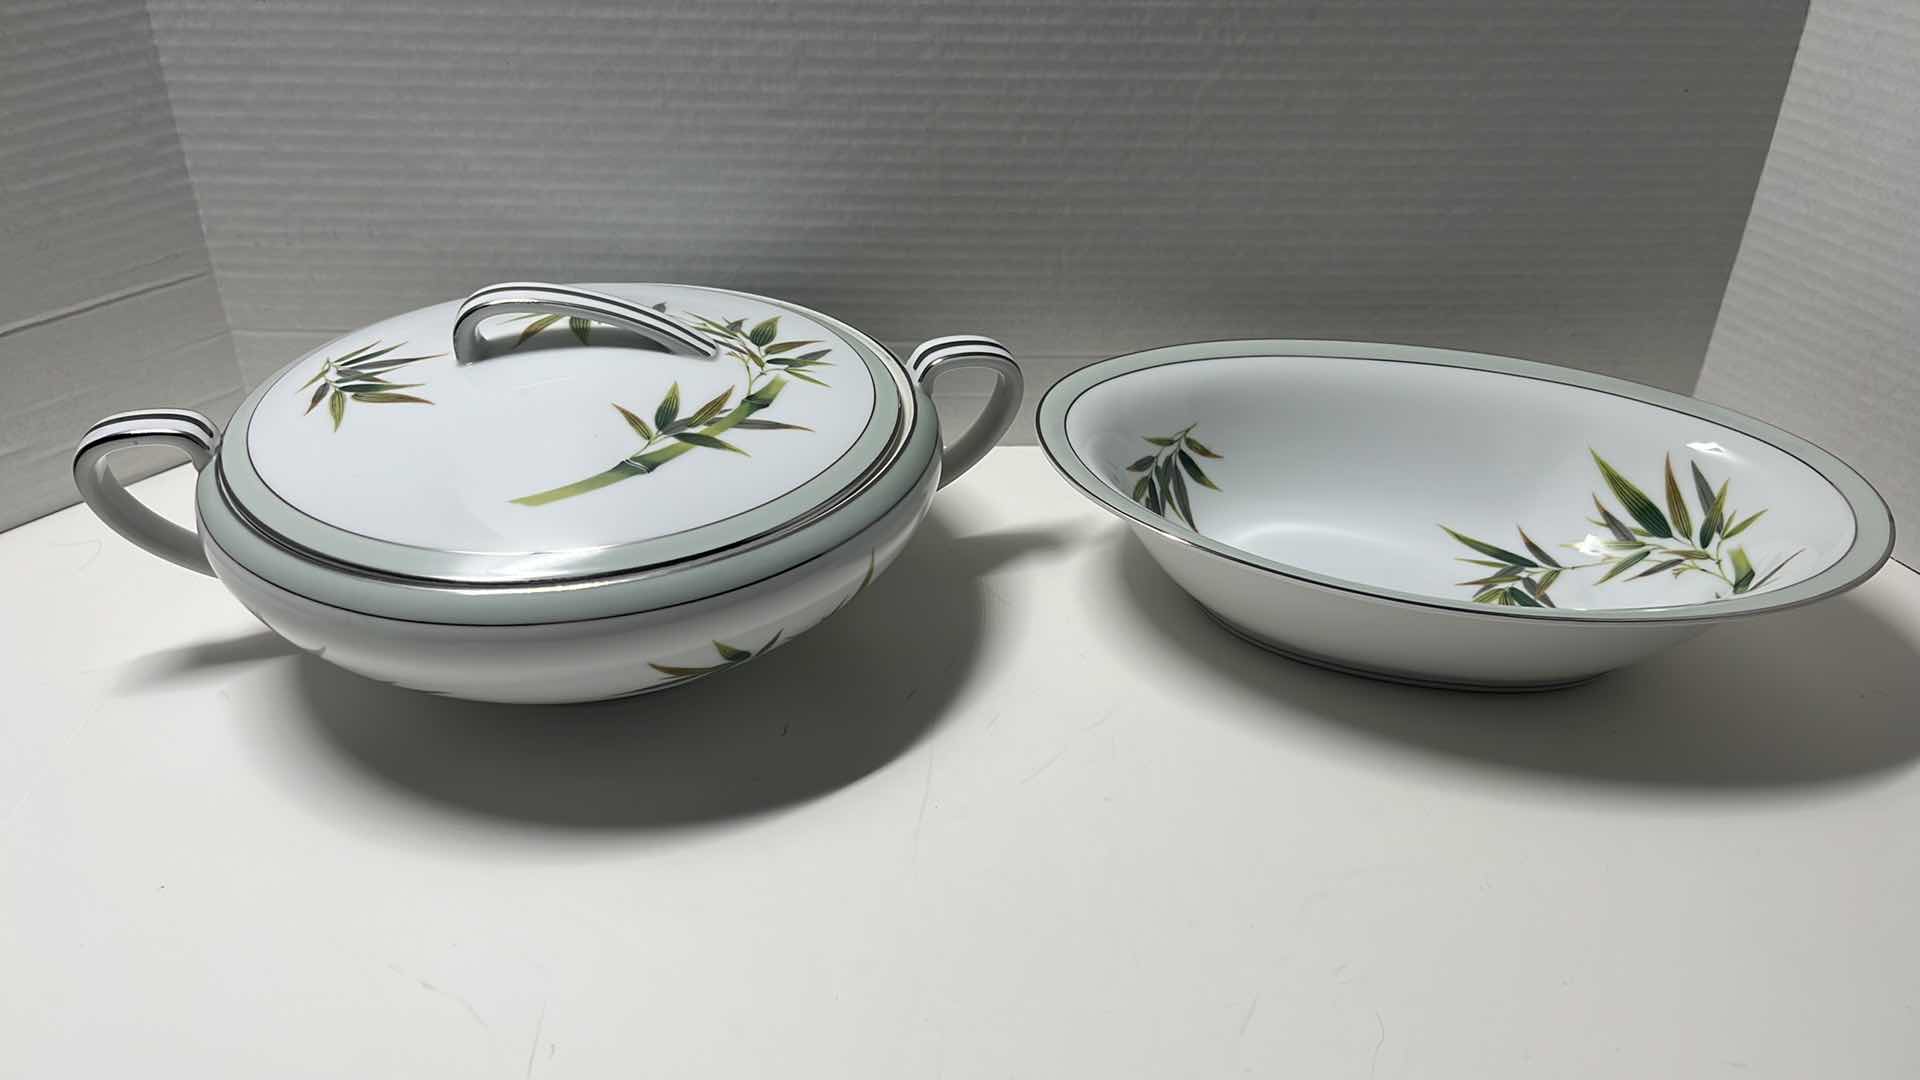 Photo 1 of NORITAKE RC JAPAN, STYLE 232 BAMBOO CHINA, ROUND COVERED VEGETABLE DISH 9.25” X 12” H4.5” & 10” OVAL VEGETABLE BOWL 7” X 10.75” H2.5” (2 PCS)